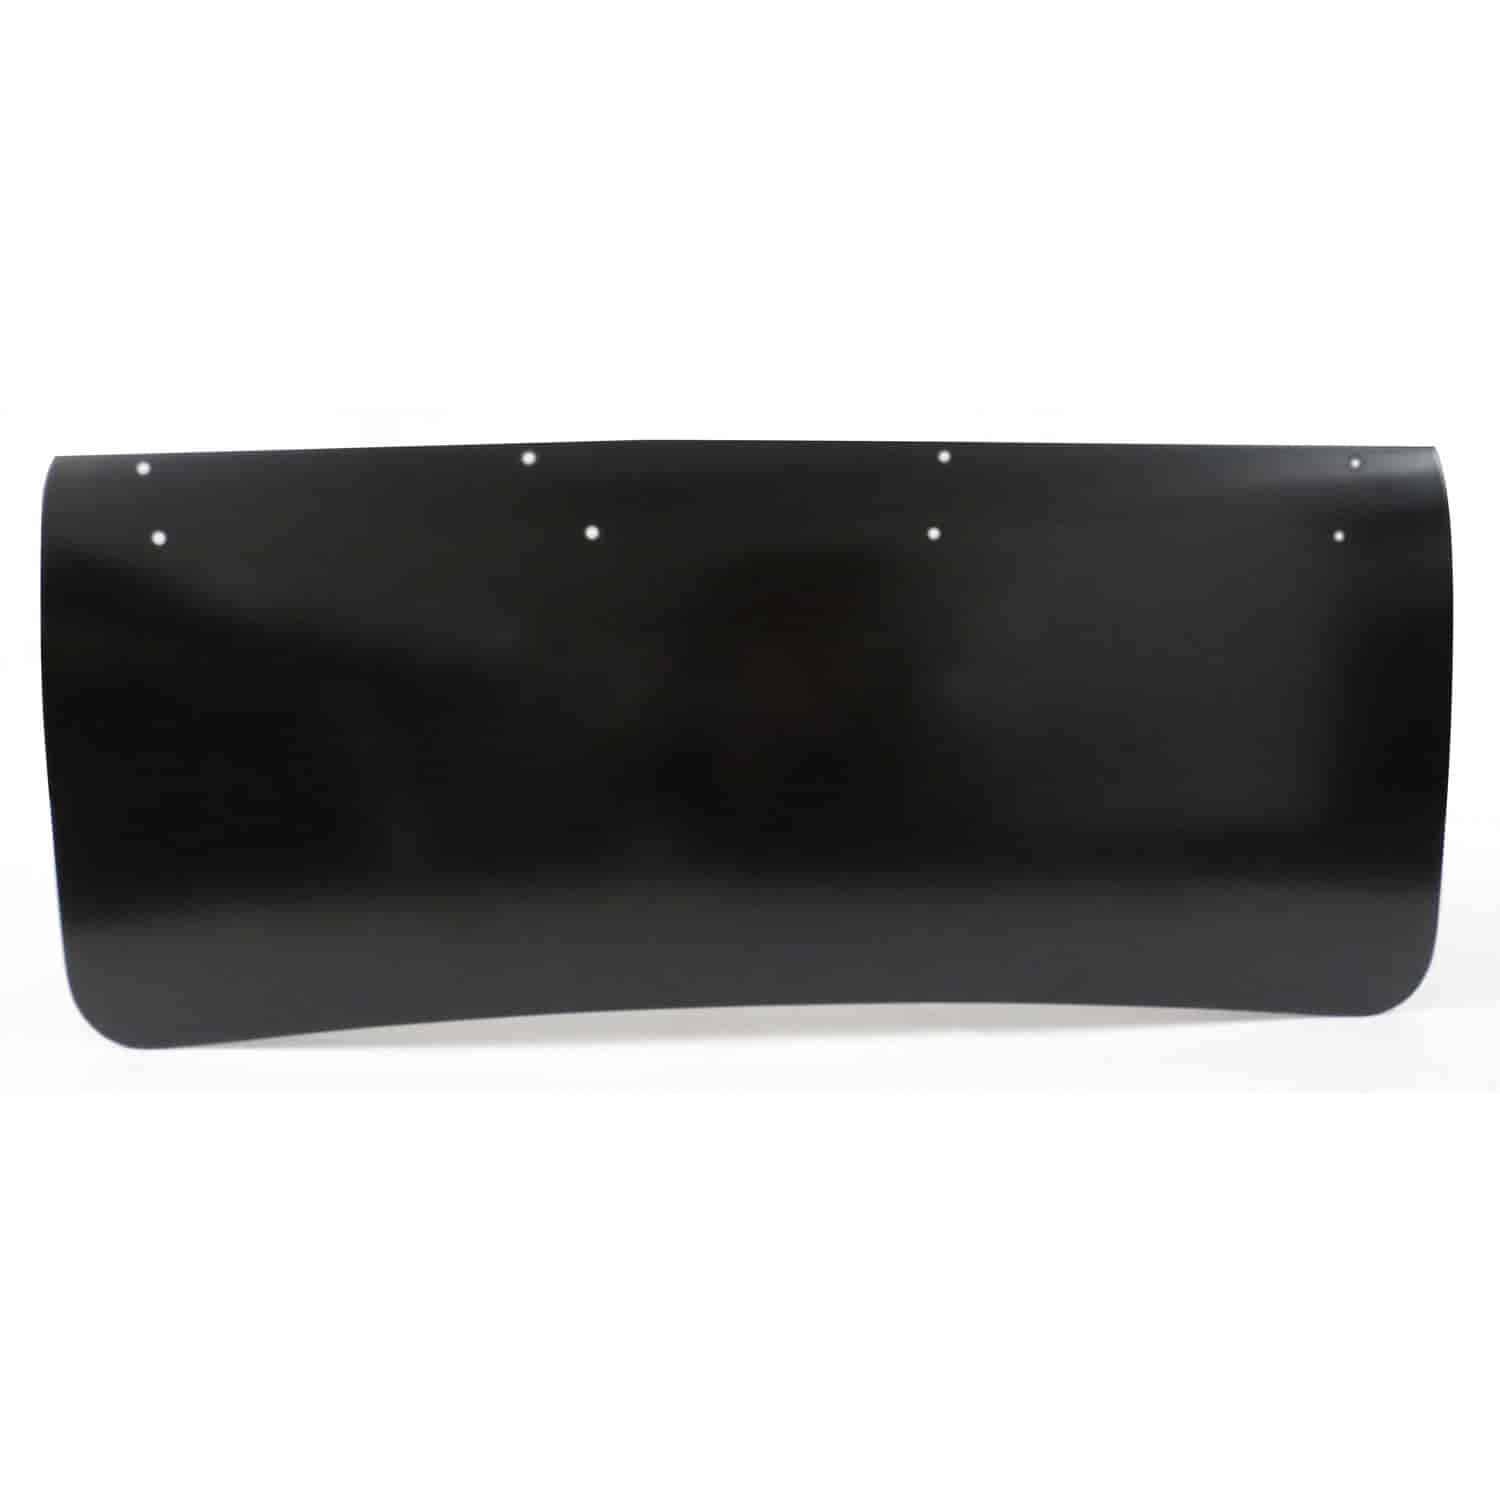 Trunk Lid With Holes for Spoiler 1967-1969 Camaro/Firebird